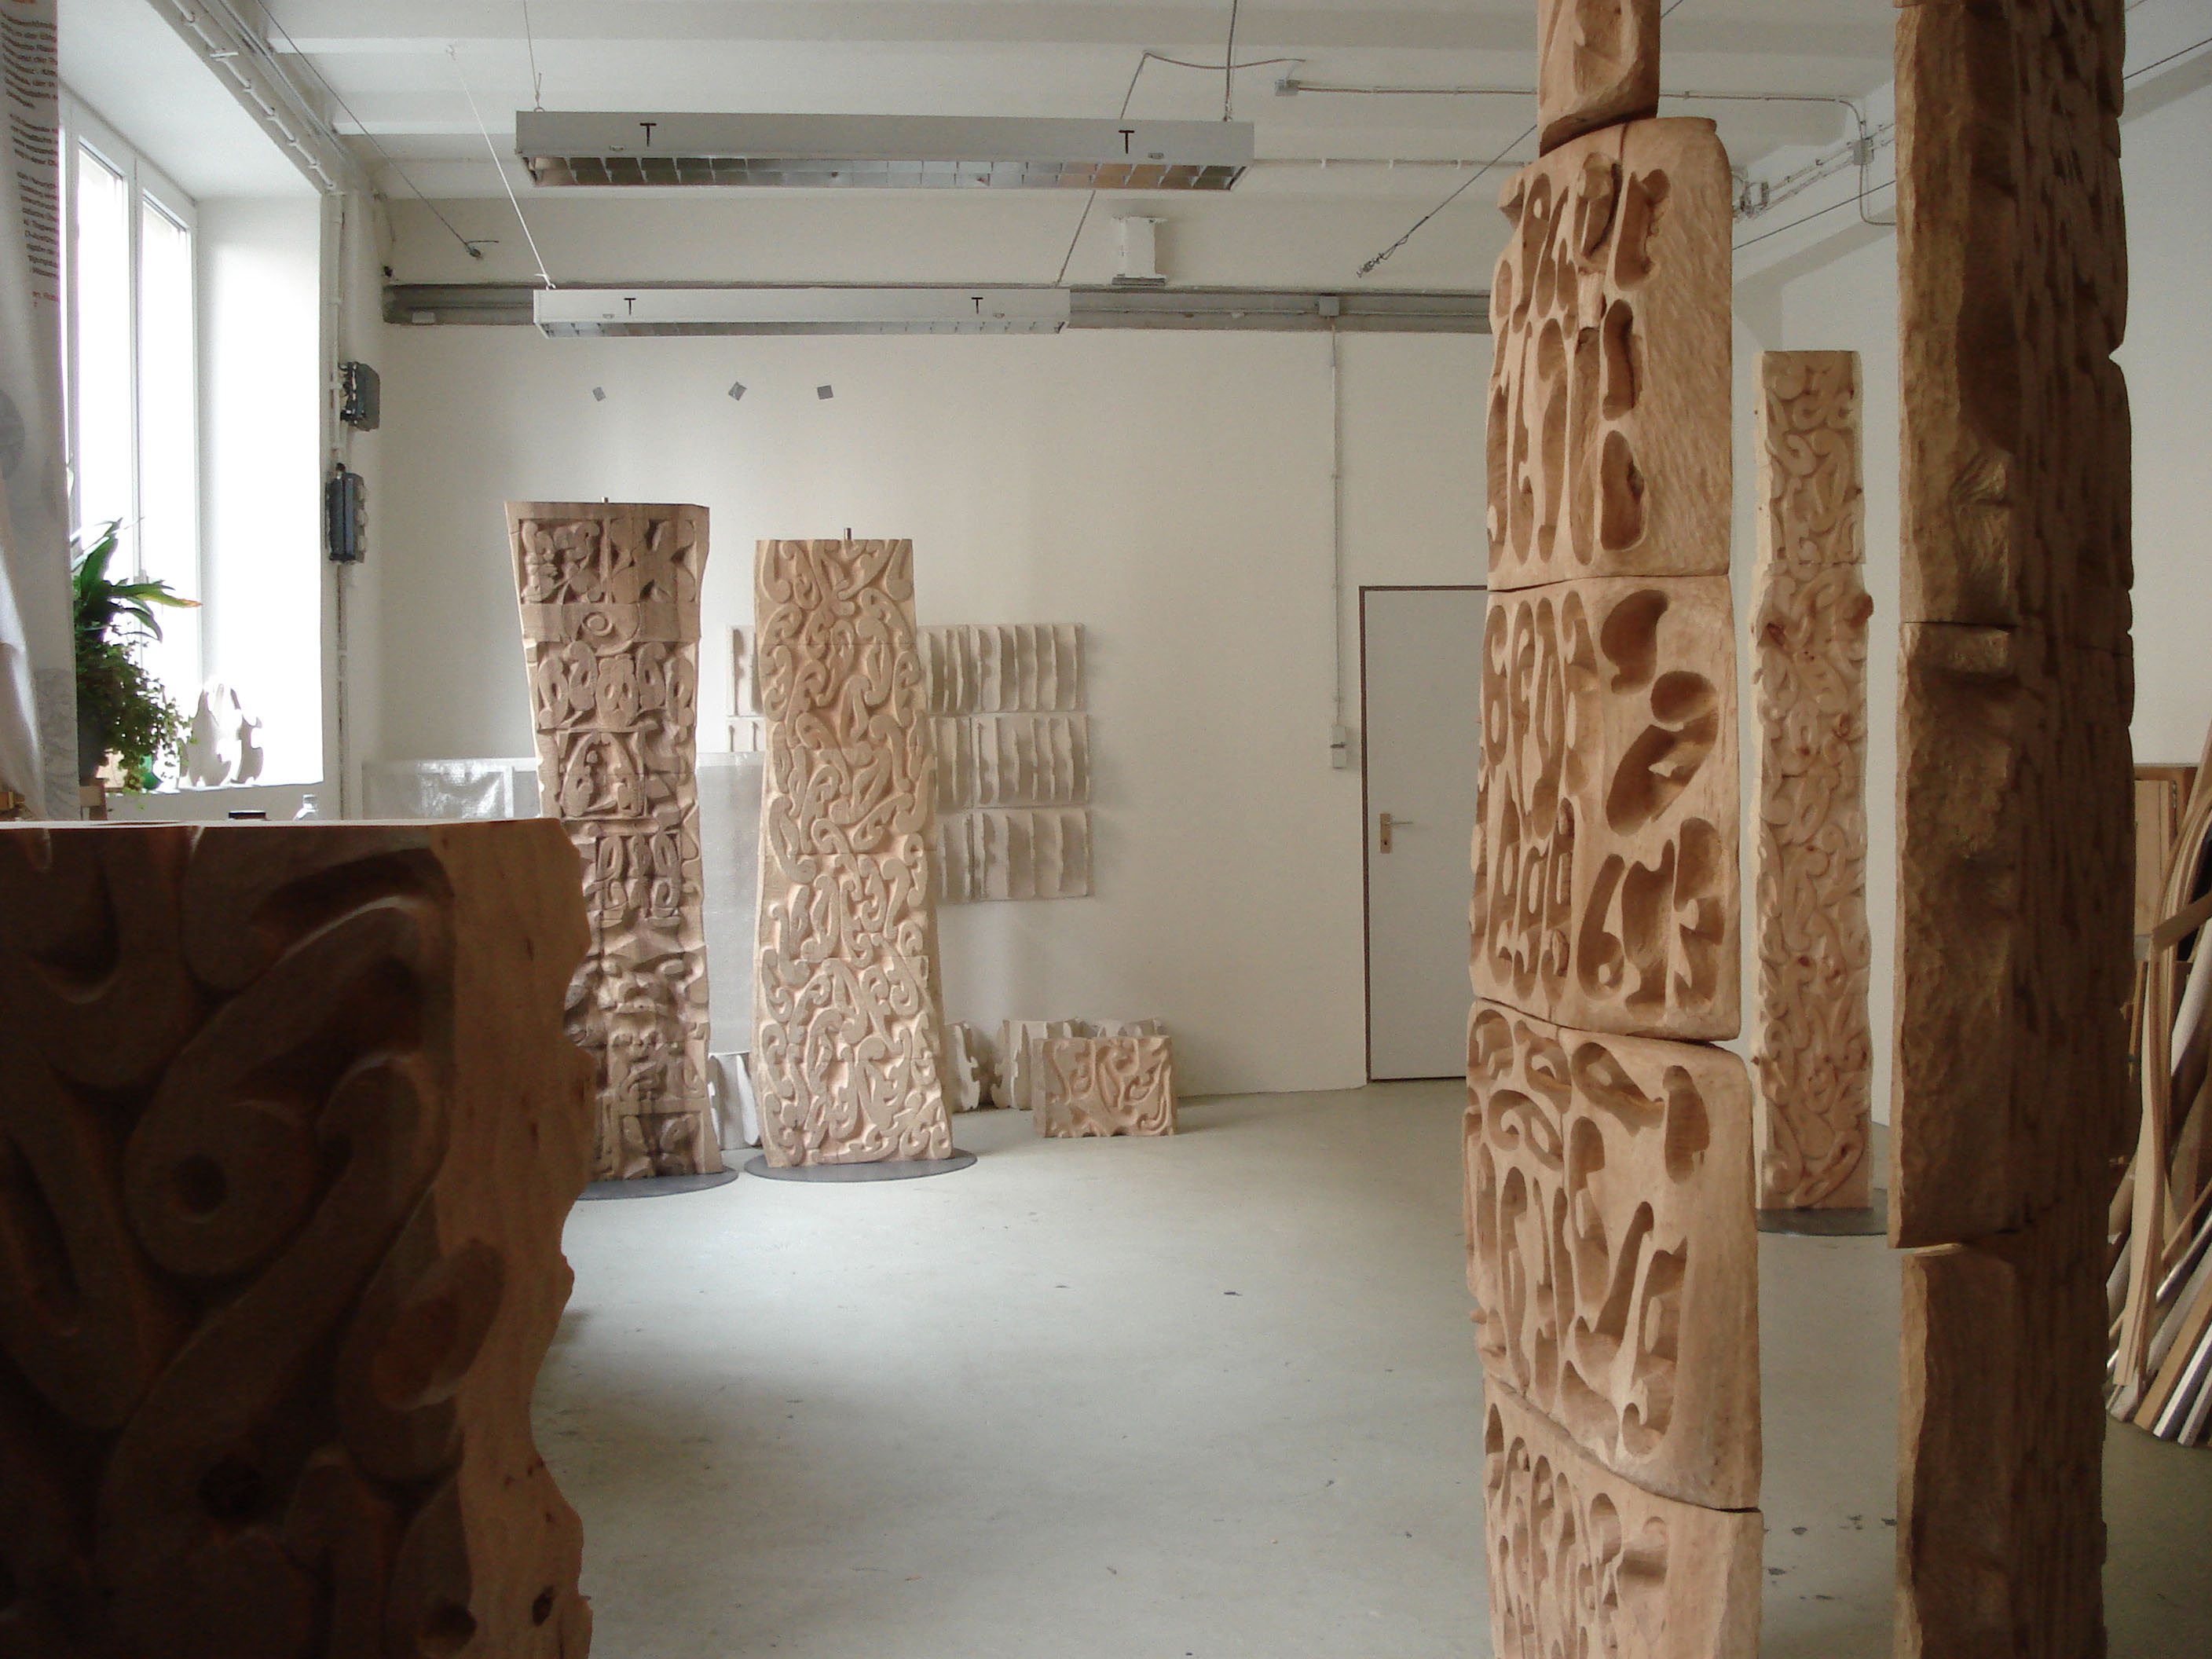 Grove of changing trees in studio